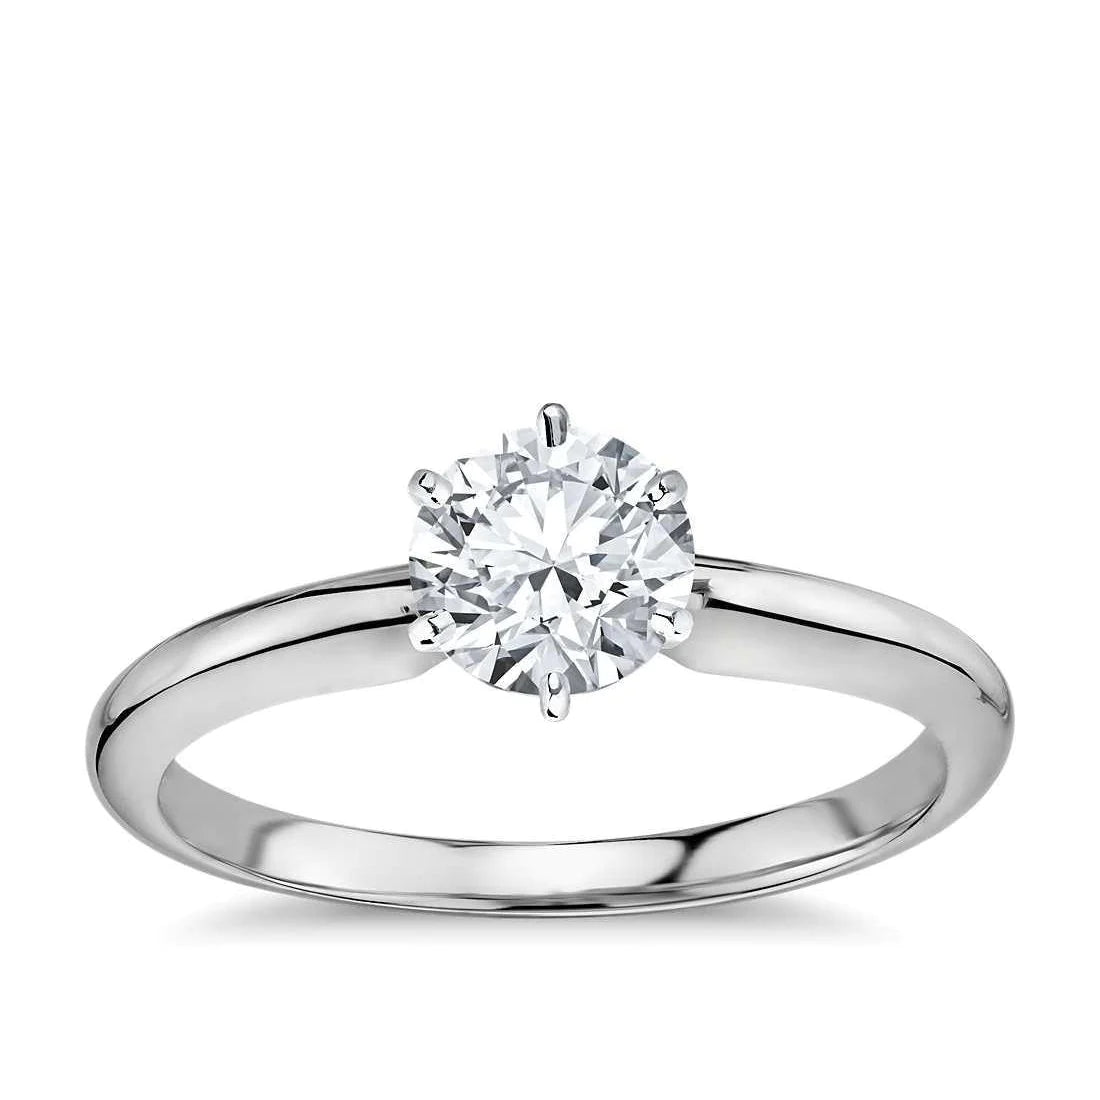 Solitaire Real Diamond Engagement Engagement Ring 1.25 Carats